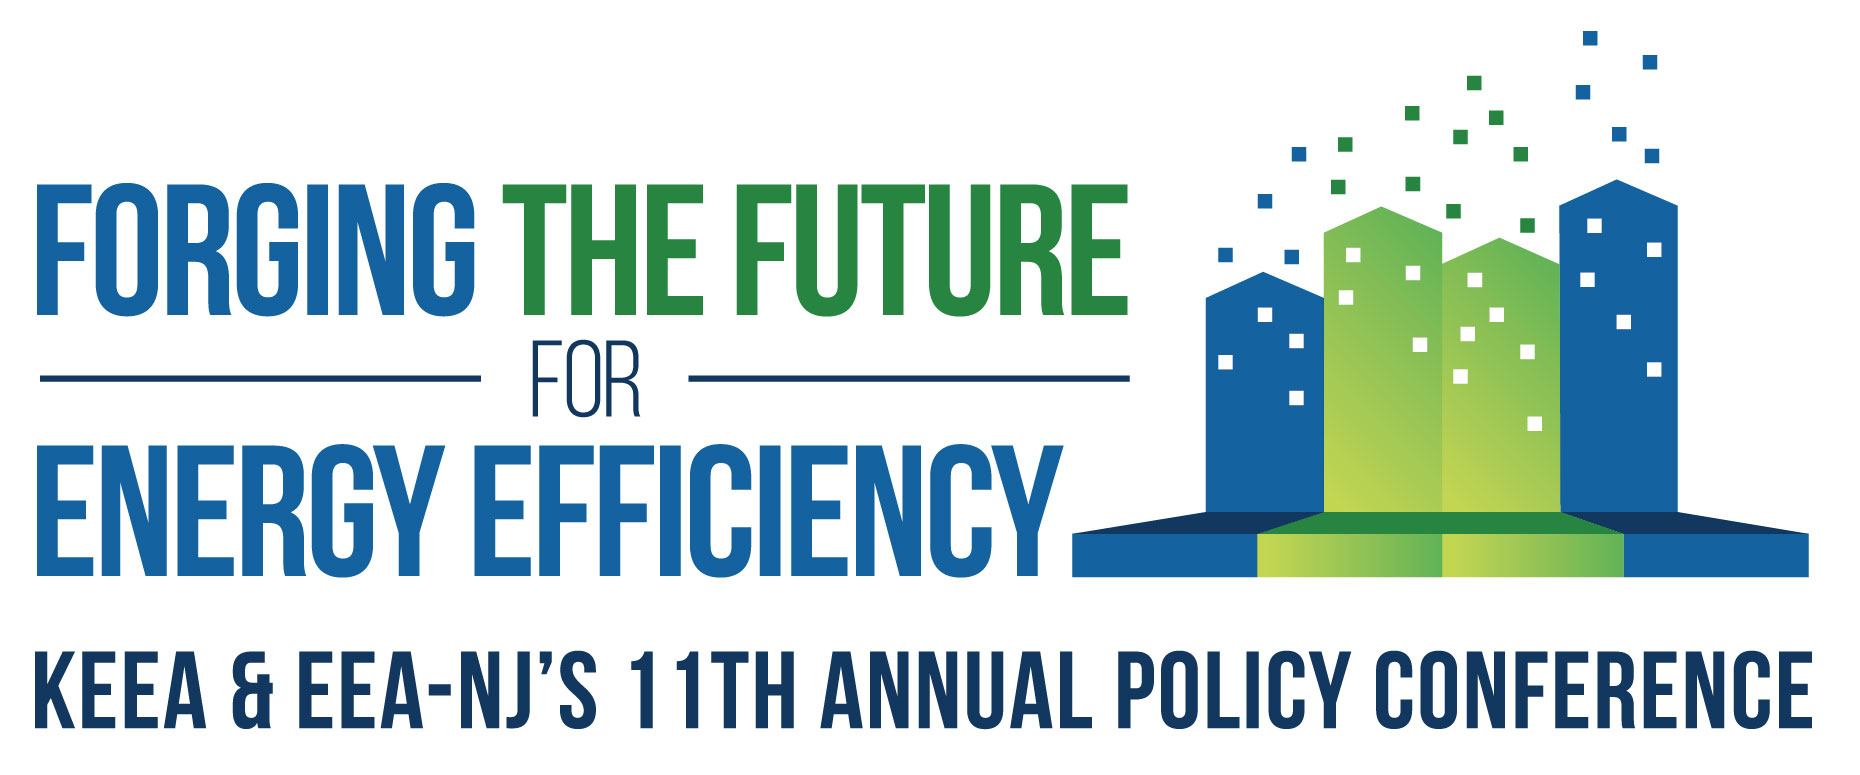 PSD will be at Forging the Future for Energy Efficiency